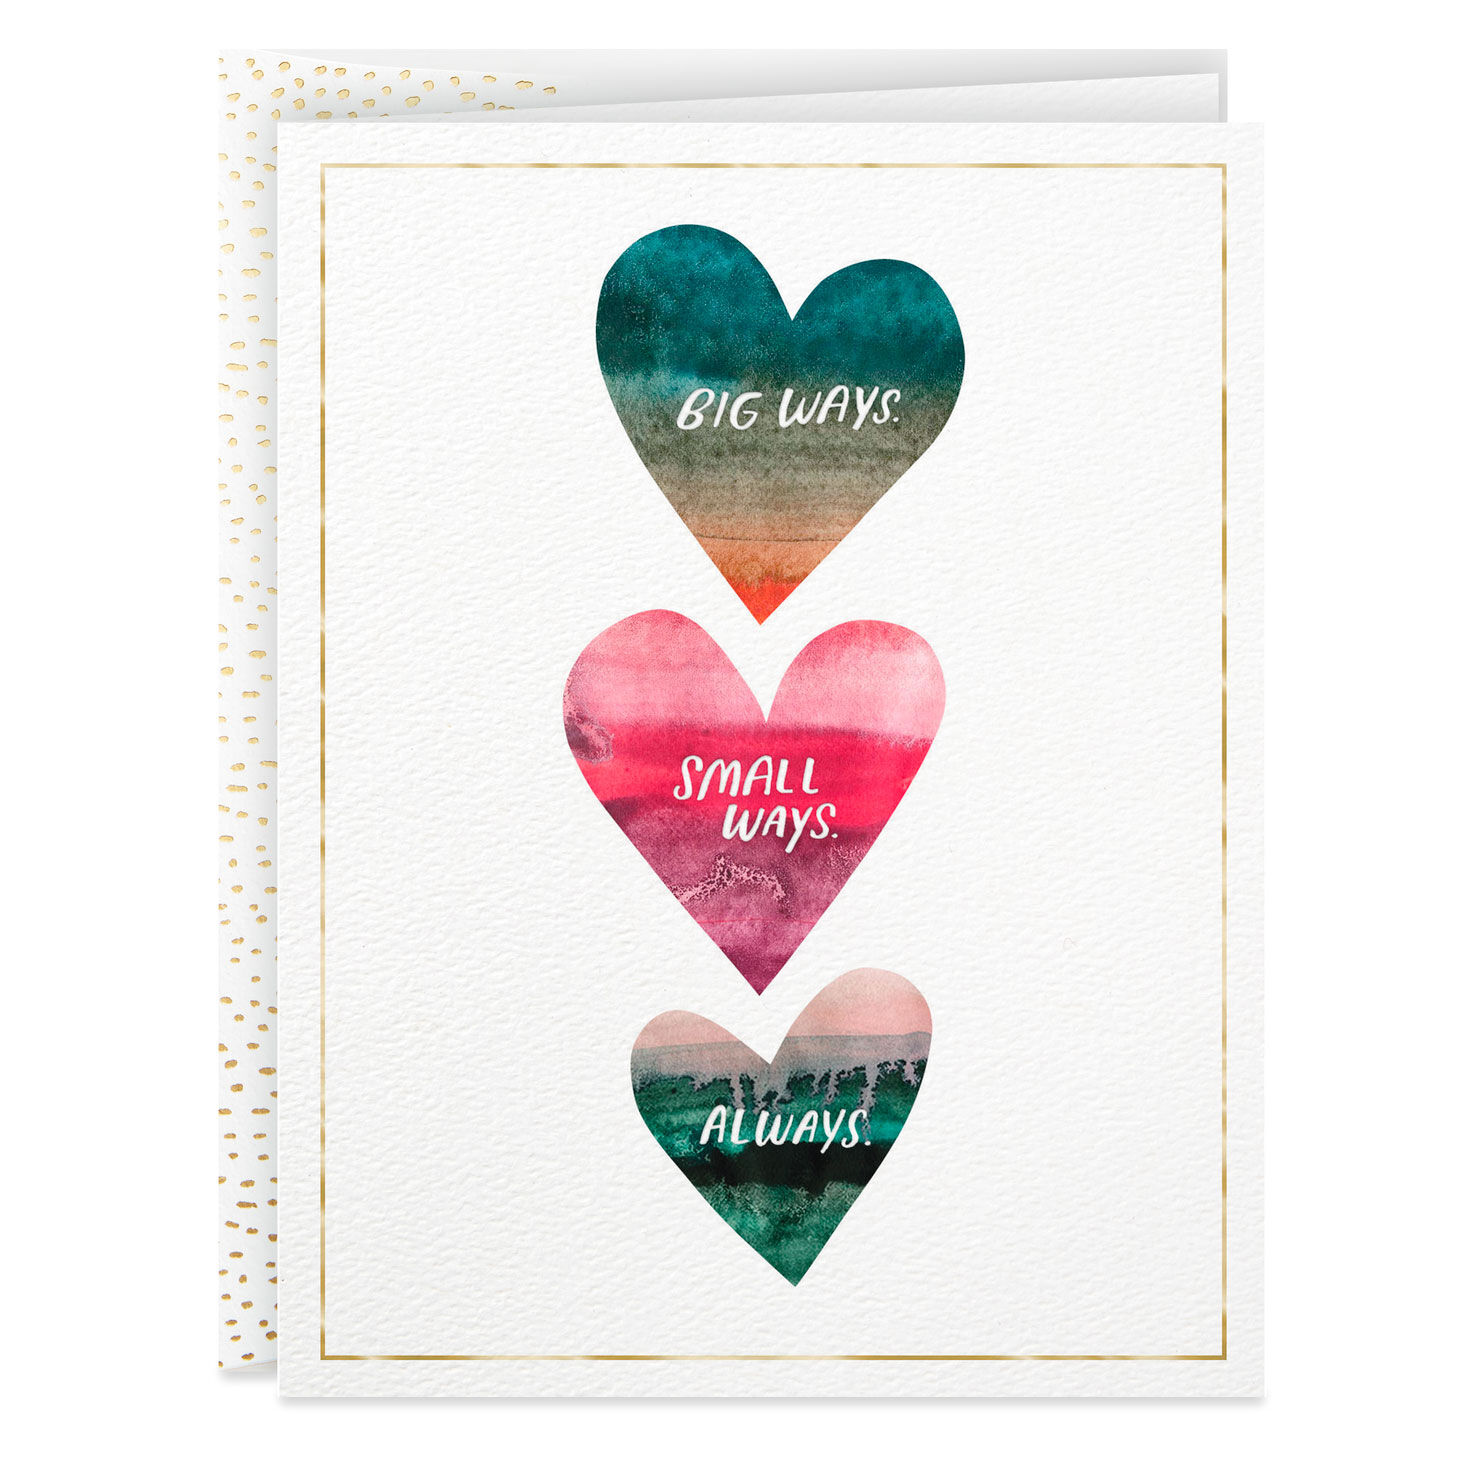 Anniversay Love You Note Card Stacked Hearts Watercolor Greeting Card 5x7 Blank Card A7 White Envelope Valentines